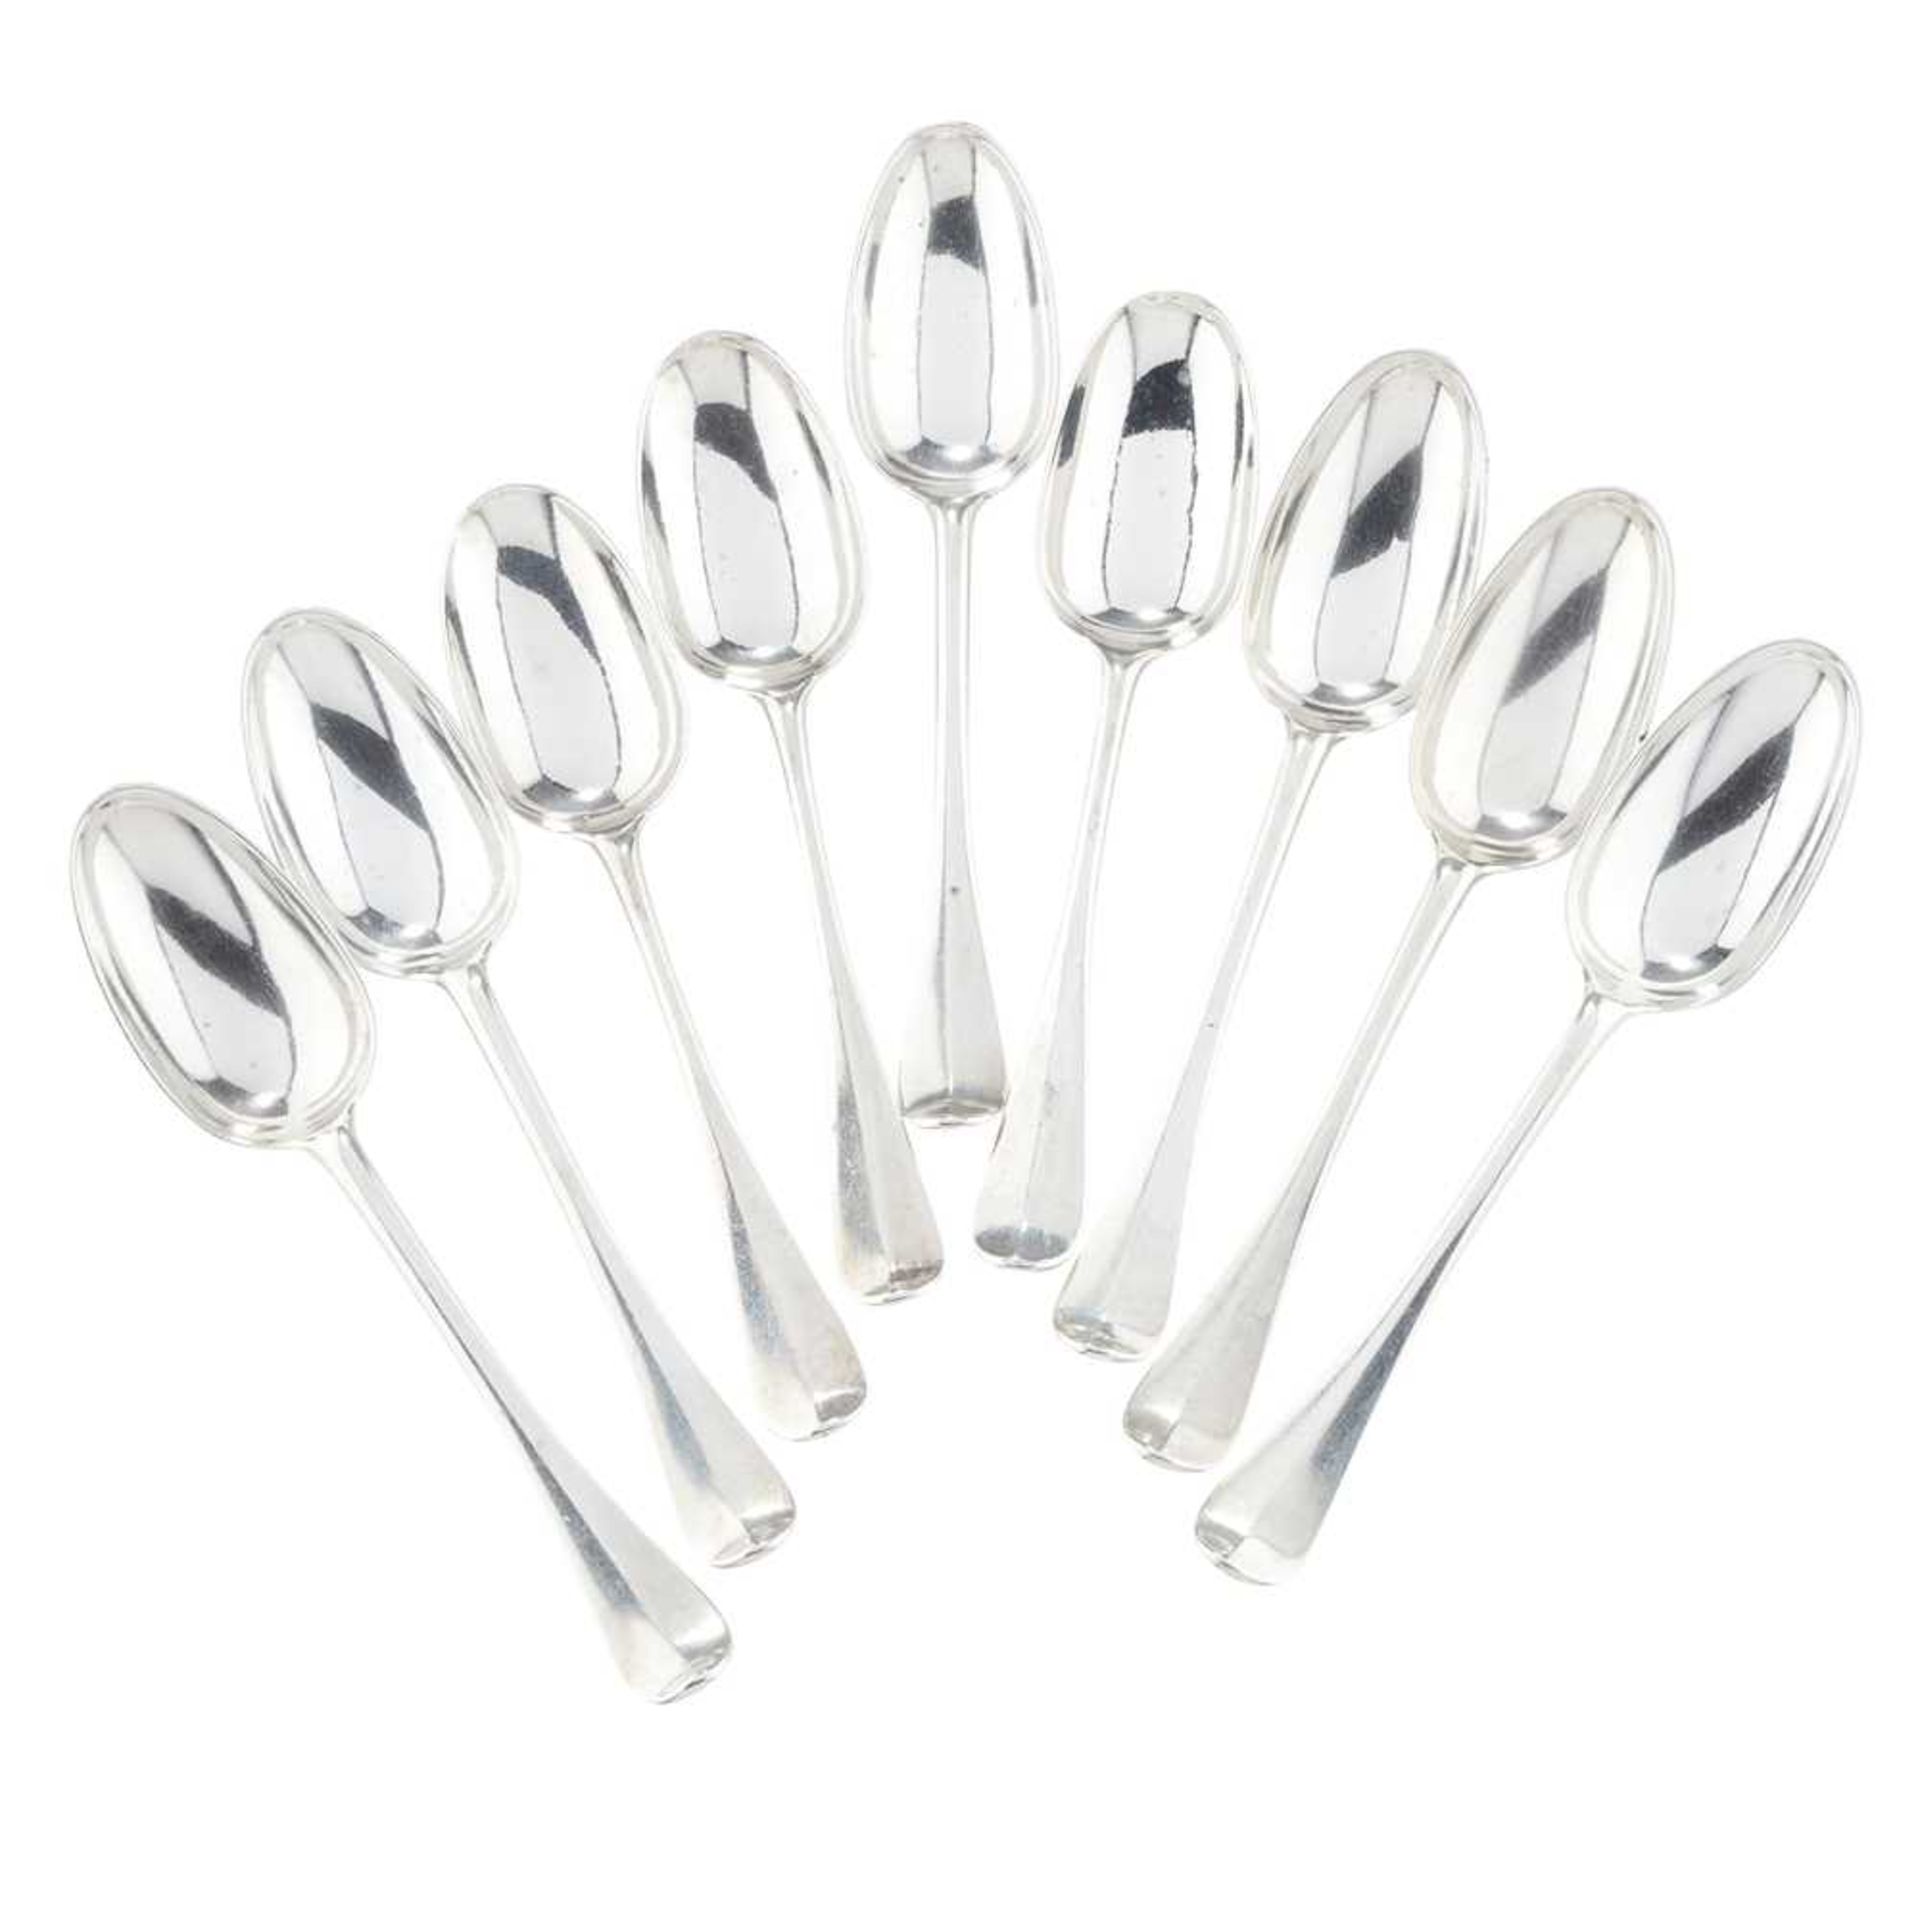 A MATCHED SET OF NINE GEORGE III SCOTTISH PROVINCIAL TABLESPOONS SIX BY JAMES GLEN, GLASGOW CIRCA 17